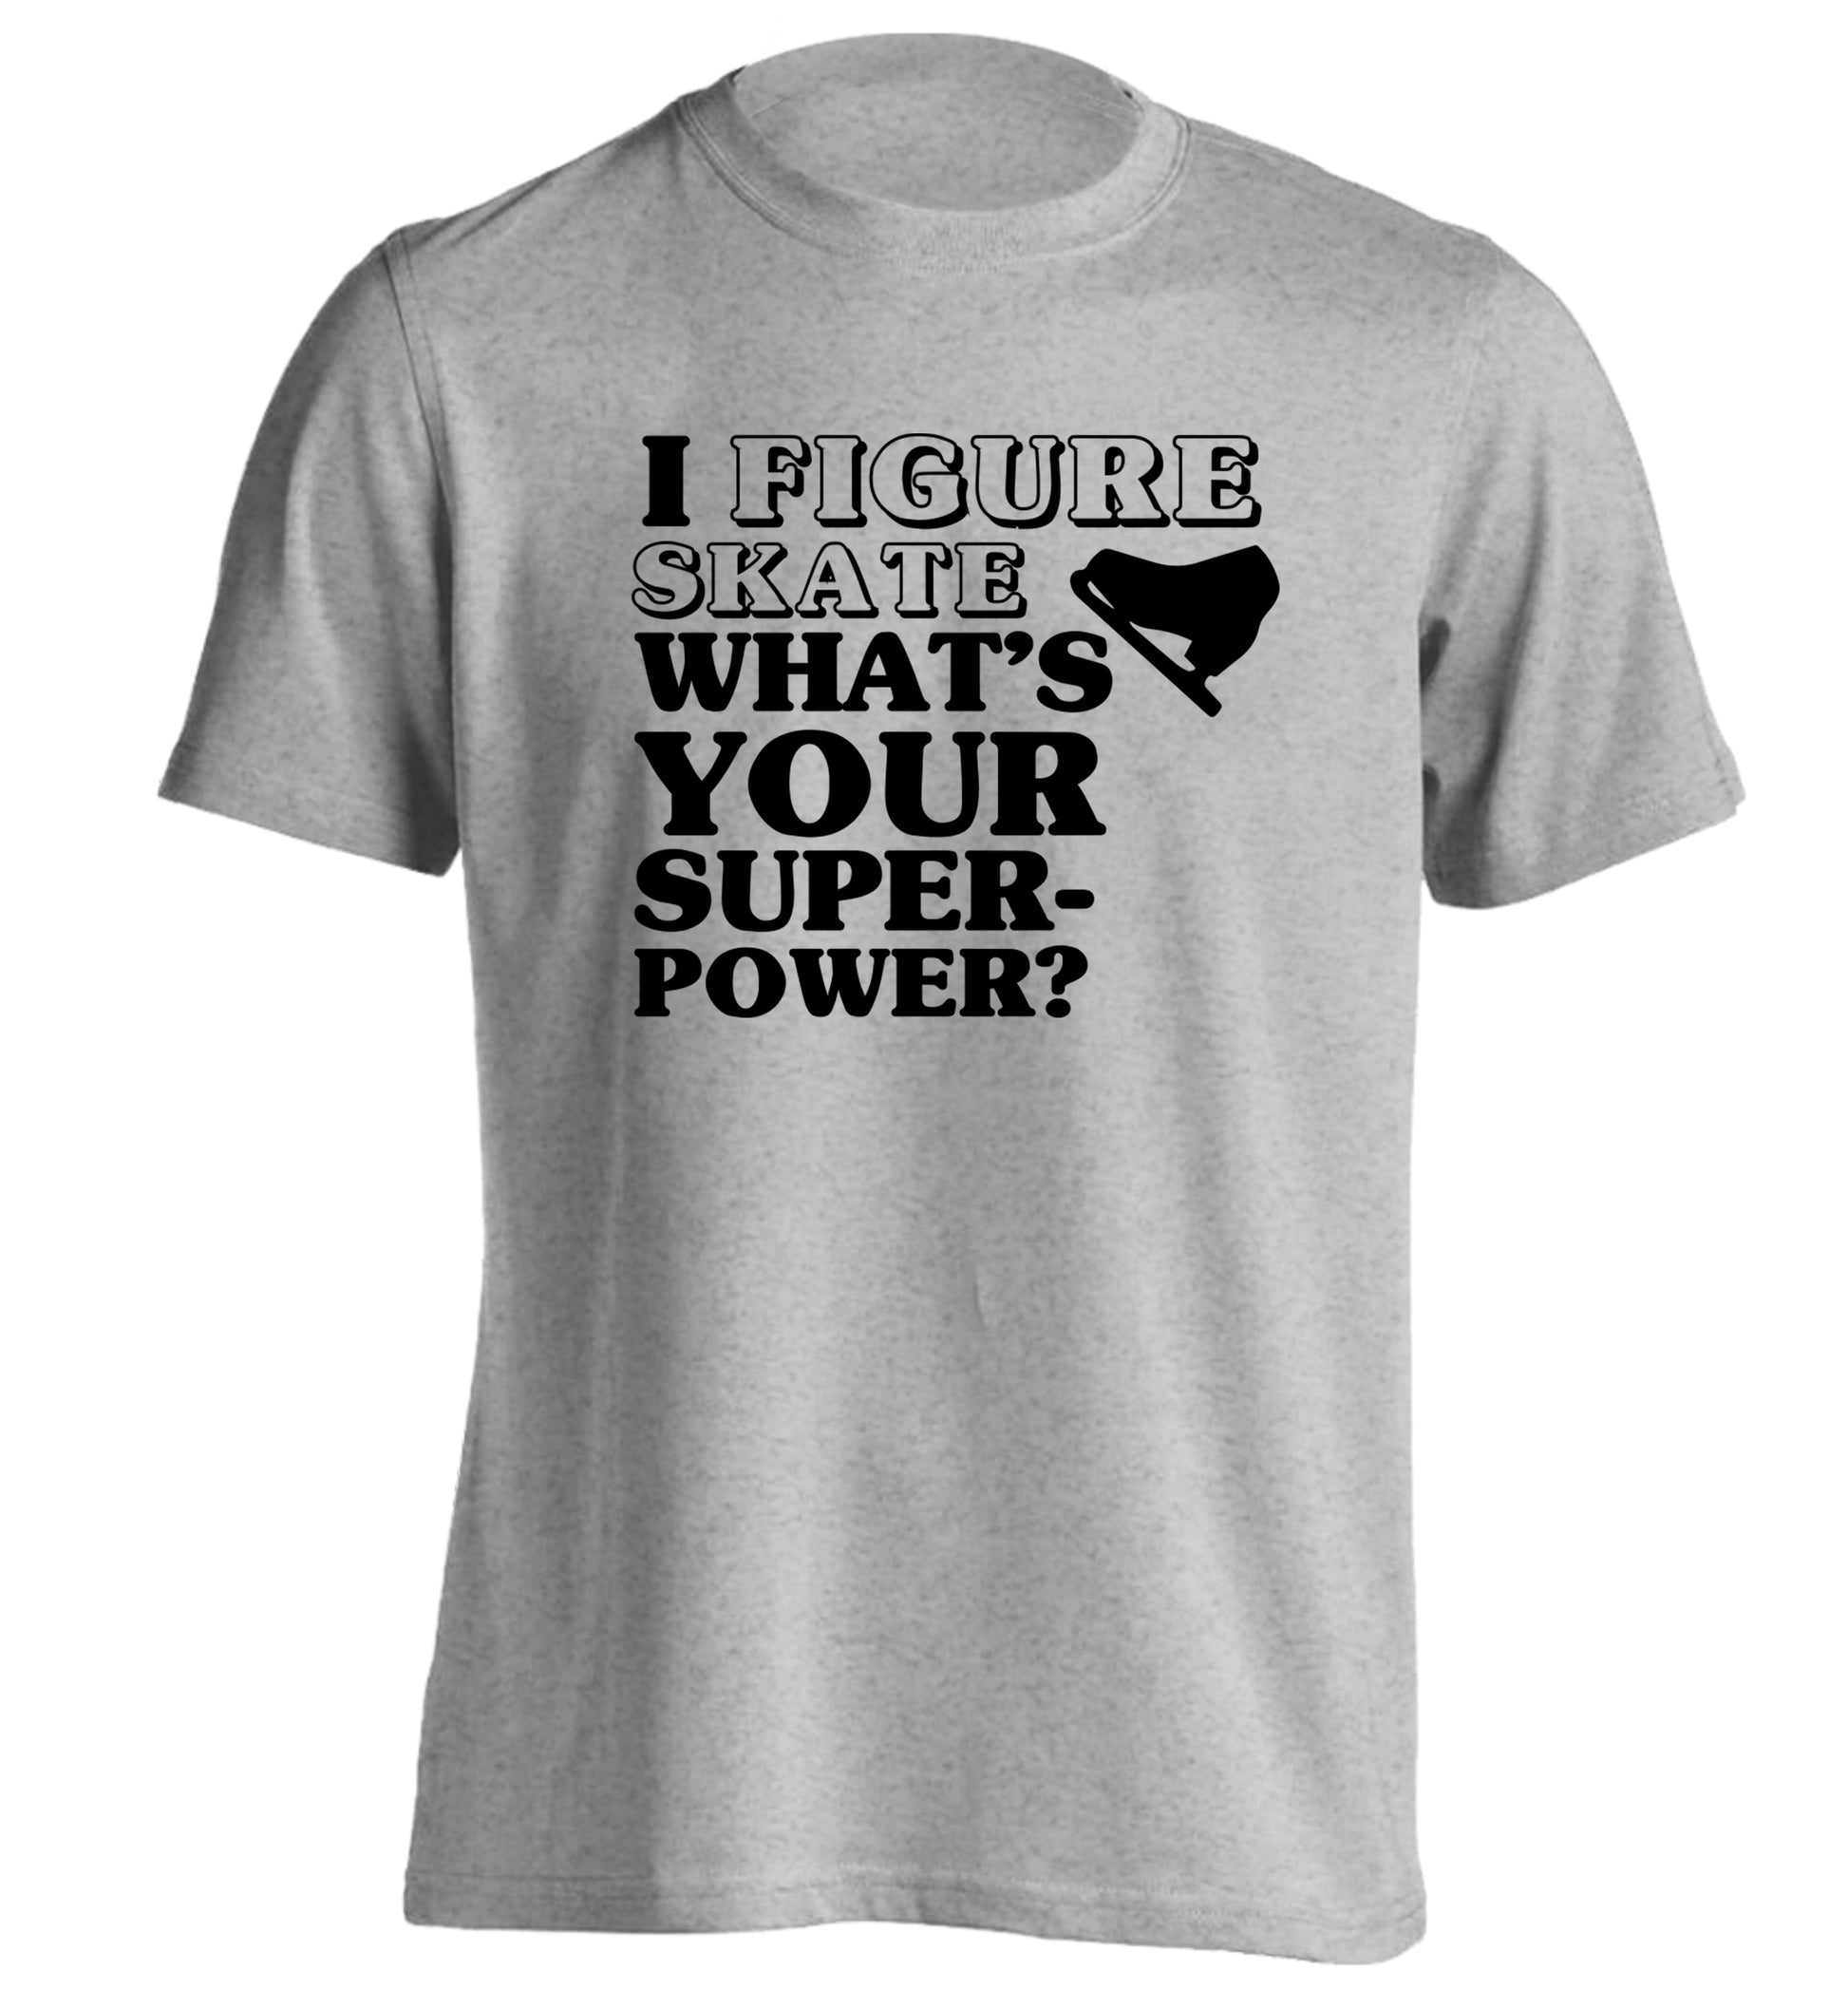 I figure skate what's your superpower? adults unisexgrey Tshirt 2XL